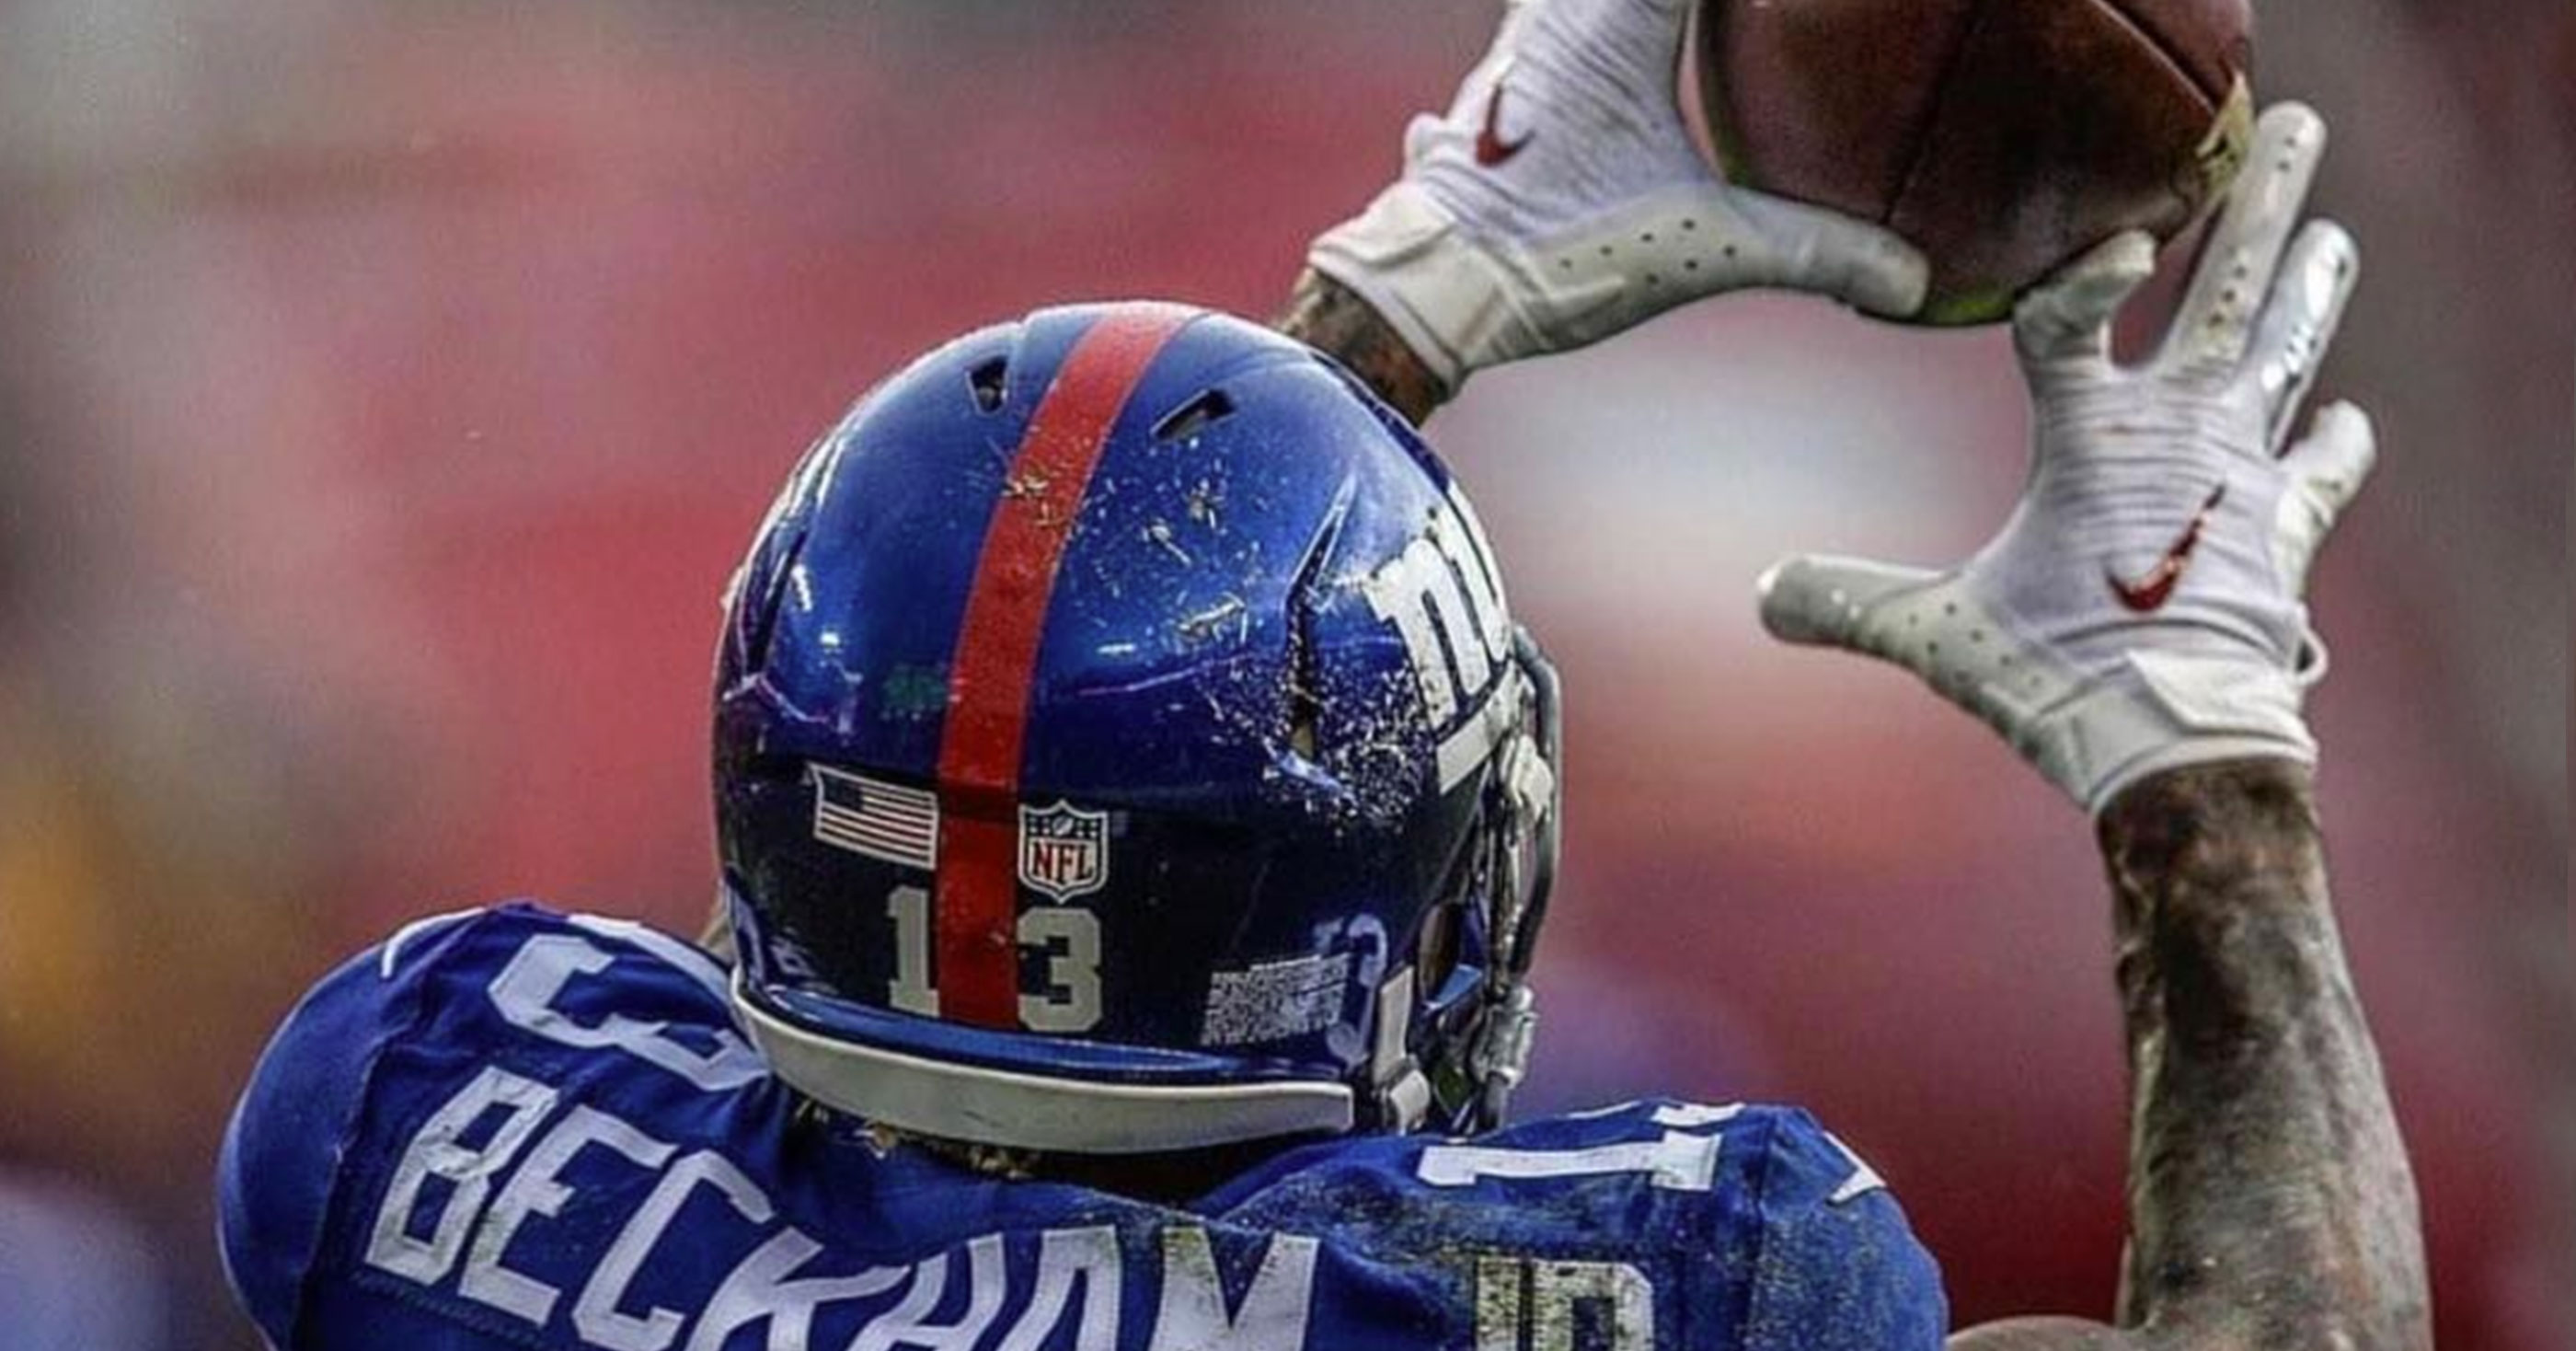 Incredible Photo Captured The Exact Moment Odell Beckham Jr. Dislocated His Finger